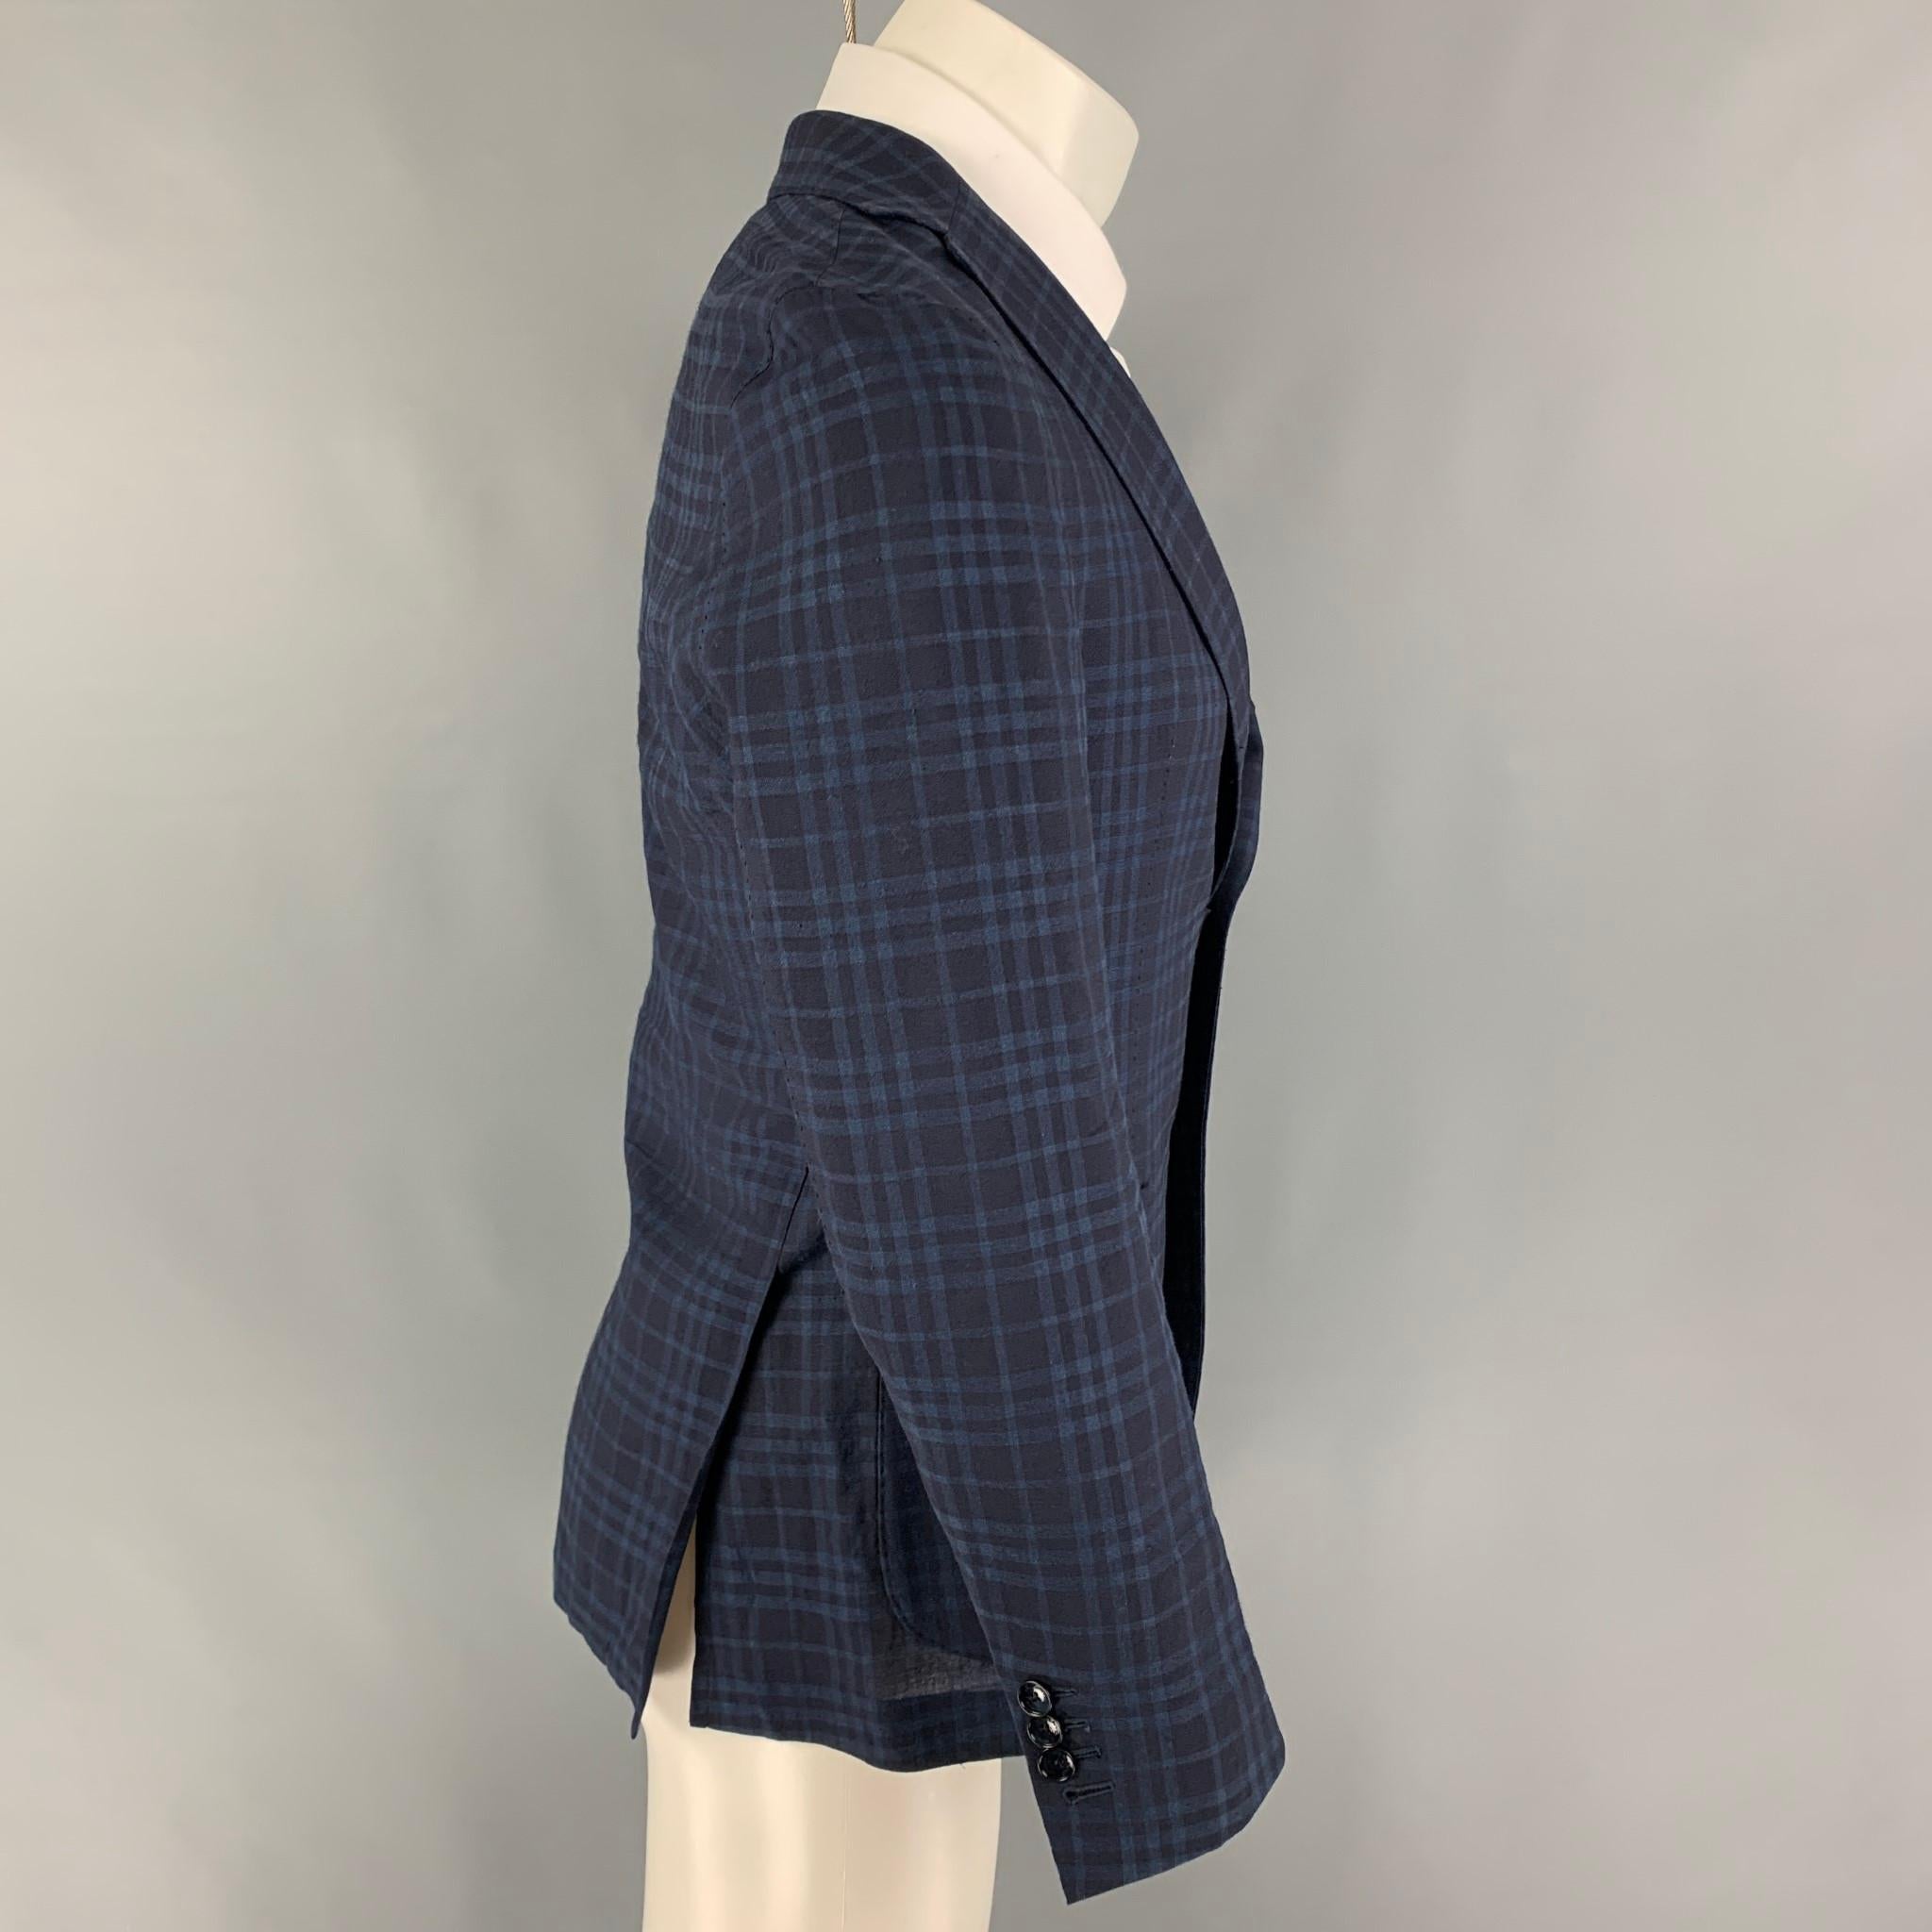 FUGATO for SHIPS sport coat comes in a navy & blue plaid flax / wool featuring a notch lapel, patch pockets, double back vent, and a three button closure. 

Very Good Pre-Owned Condition.
Marked: 46

Measurements:

Shoulder: 16.5 in.
Chest: 36